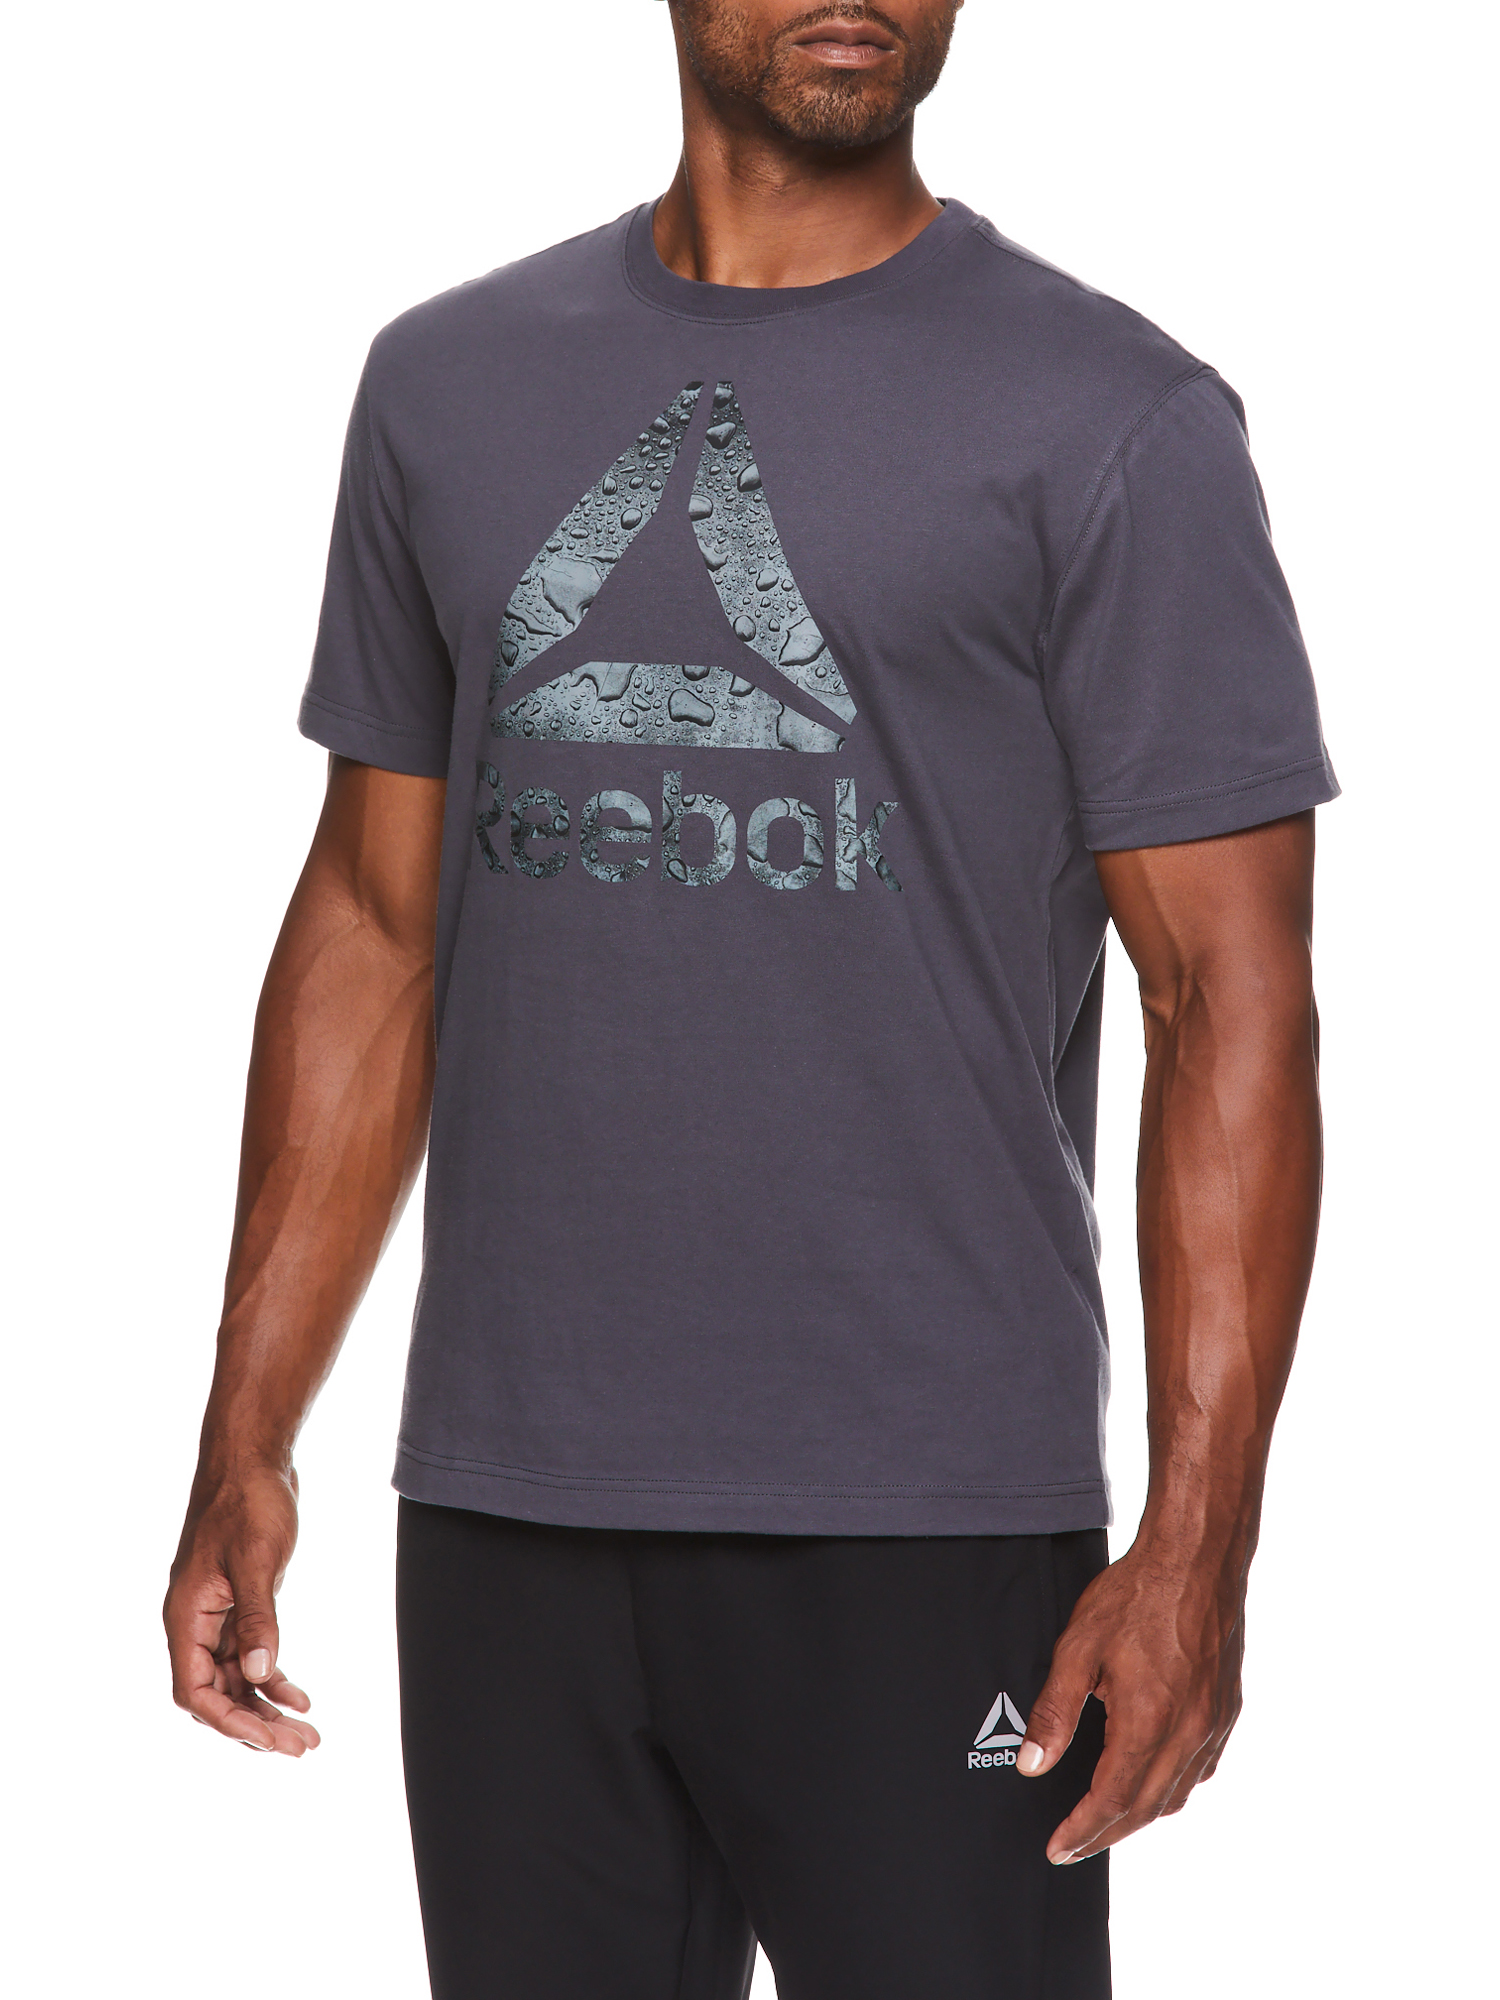 Reebok Men's and Big Men's Active Hiit Graphic Training Tee, up to Size 3XL - image 2 of 4